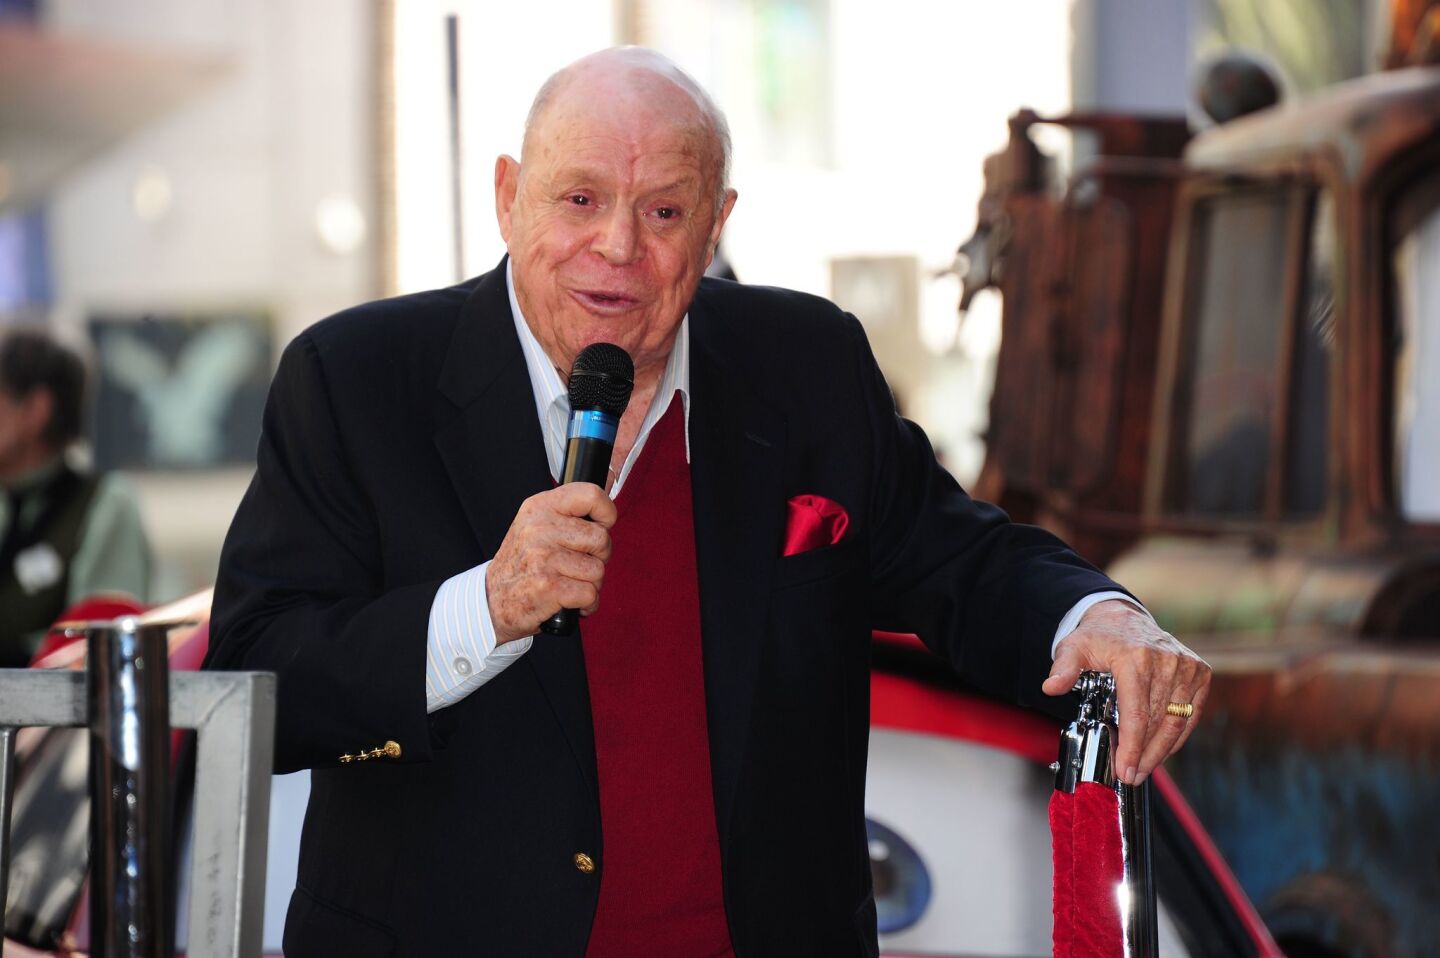 Rickles speaks during the Hollywood Walk of Fame star ceremony for "Toy Story" director John Lasseter in Los Angeles on Nov. 1, 2011.